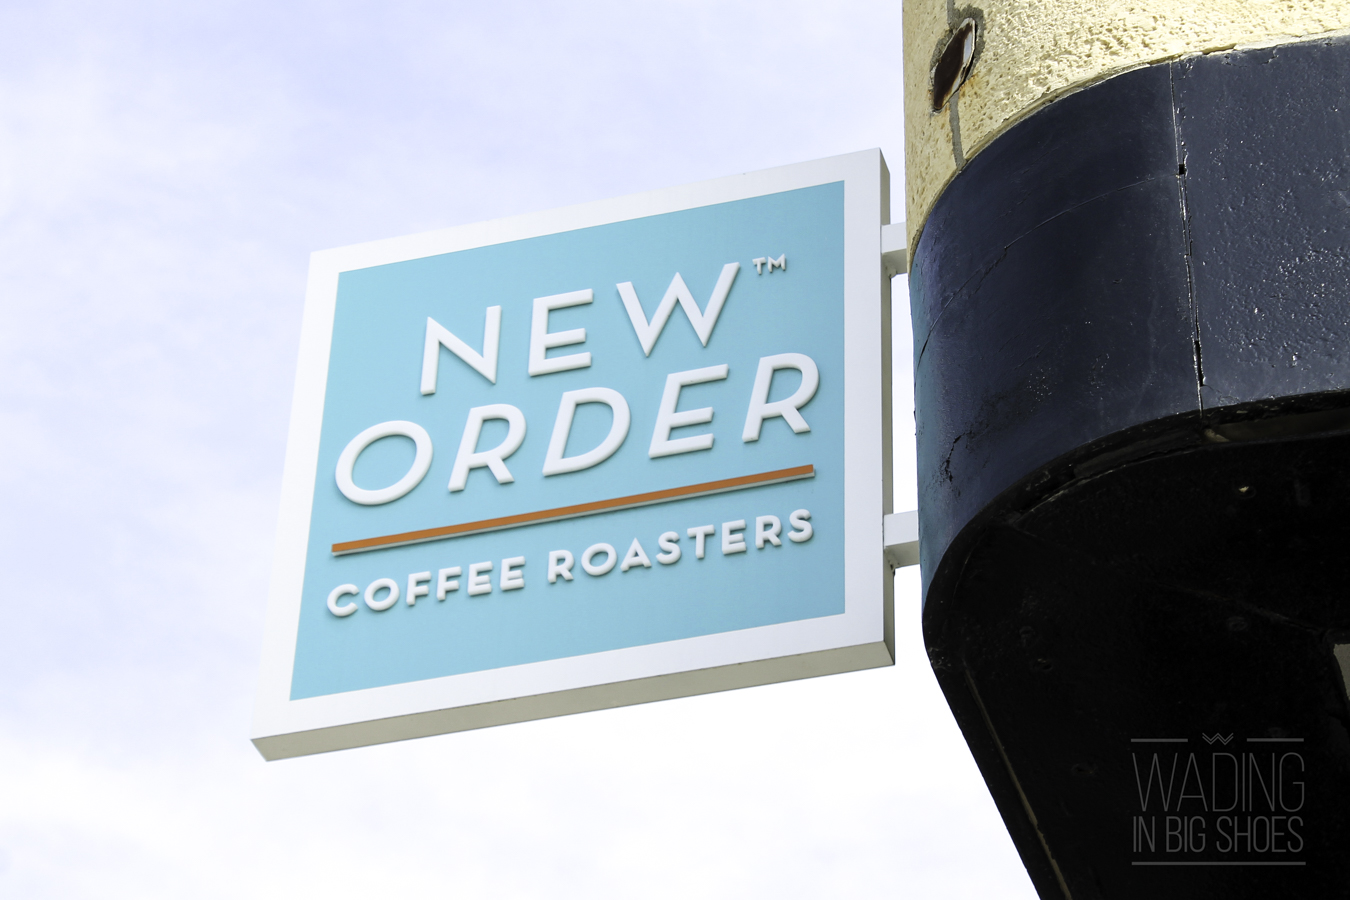 Wading in Big Shoes - Detroit Coffee Shop Spotlight: New Order Coffee Roasters